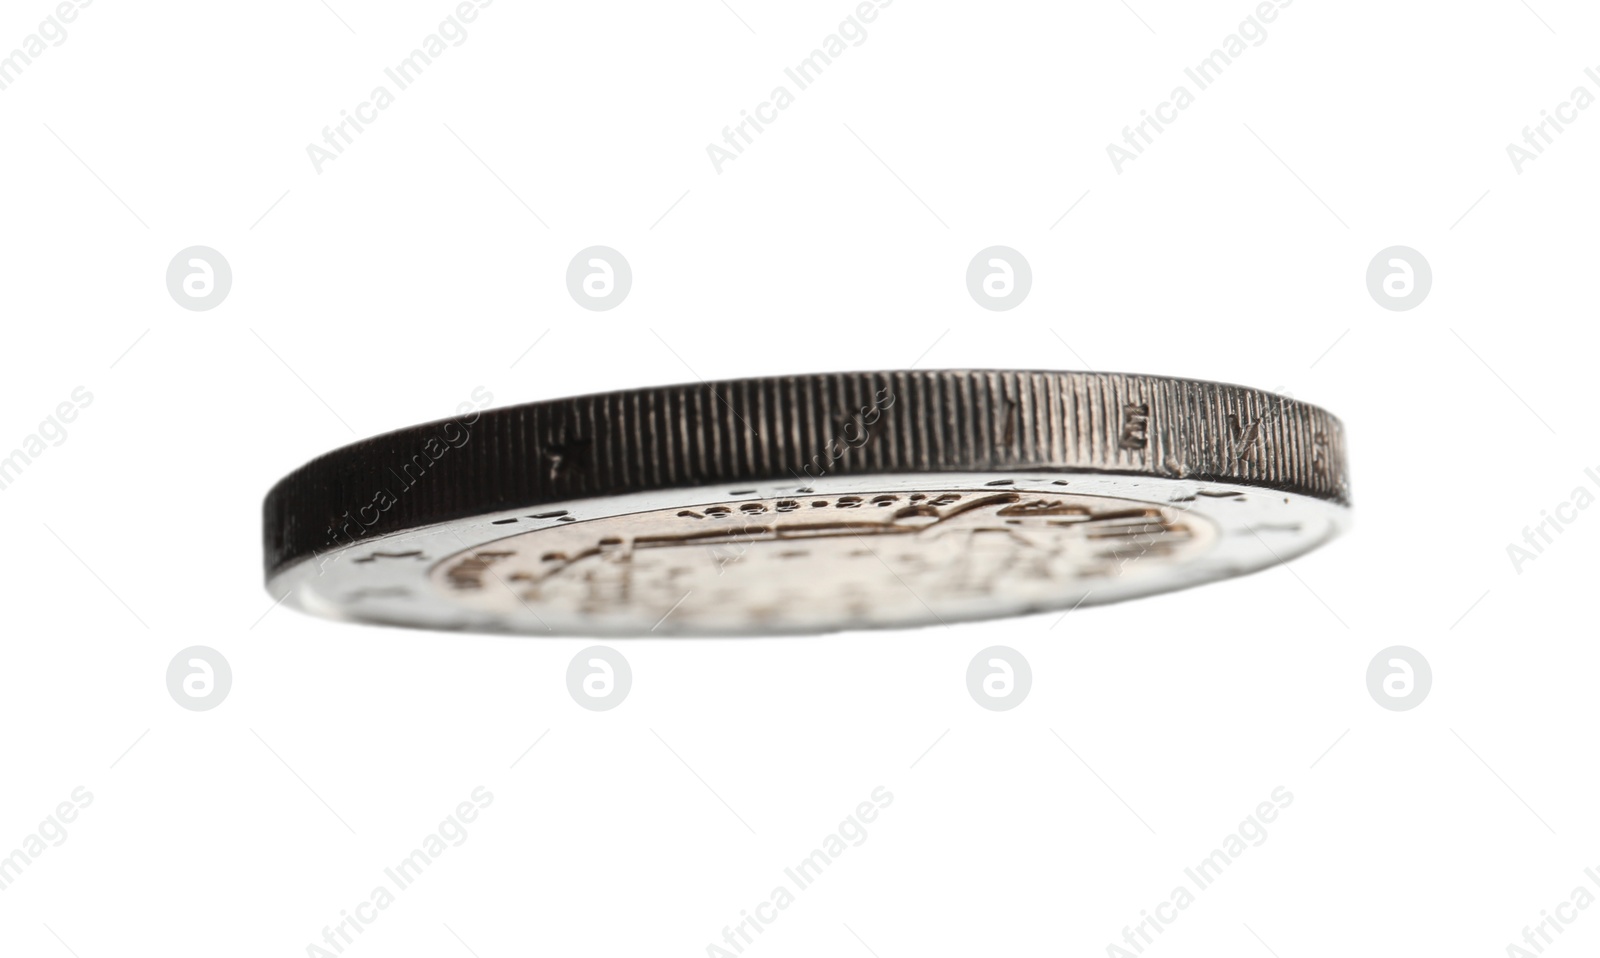 Photo of Metal coin on white background, view of edge